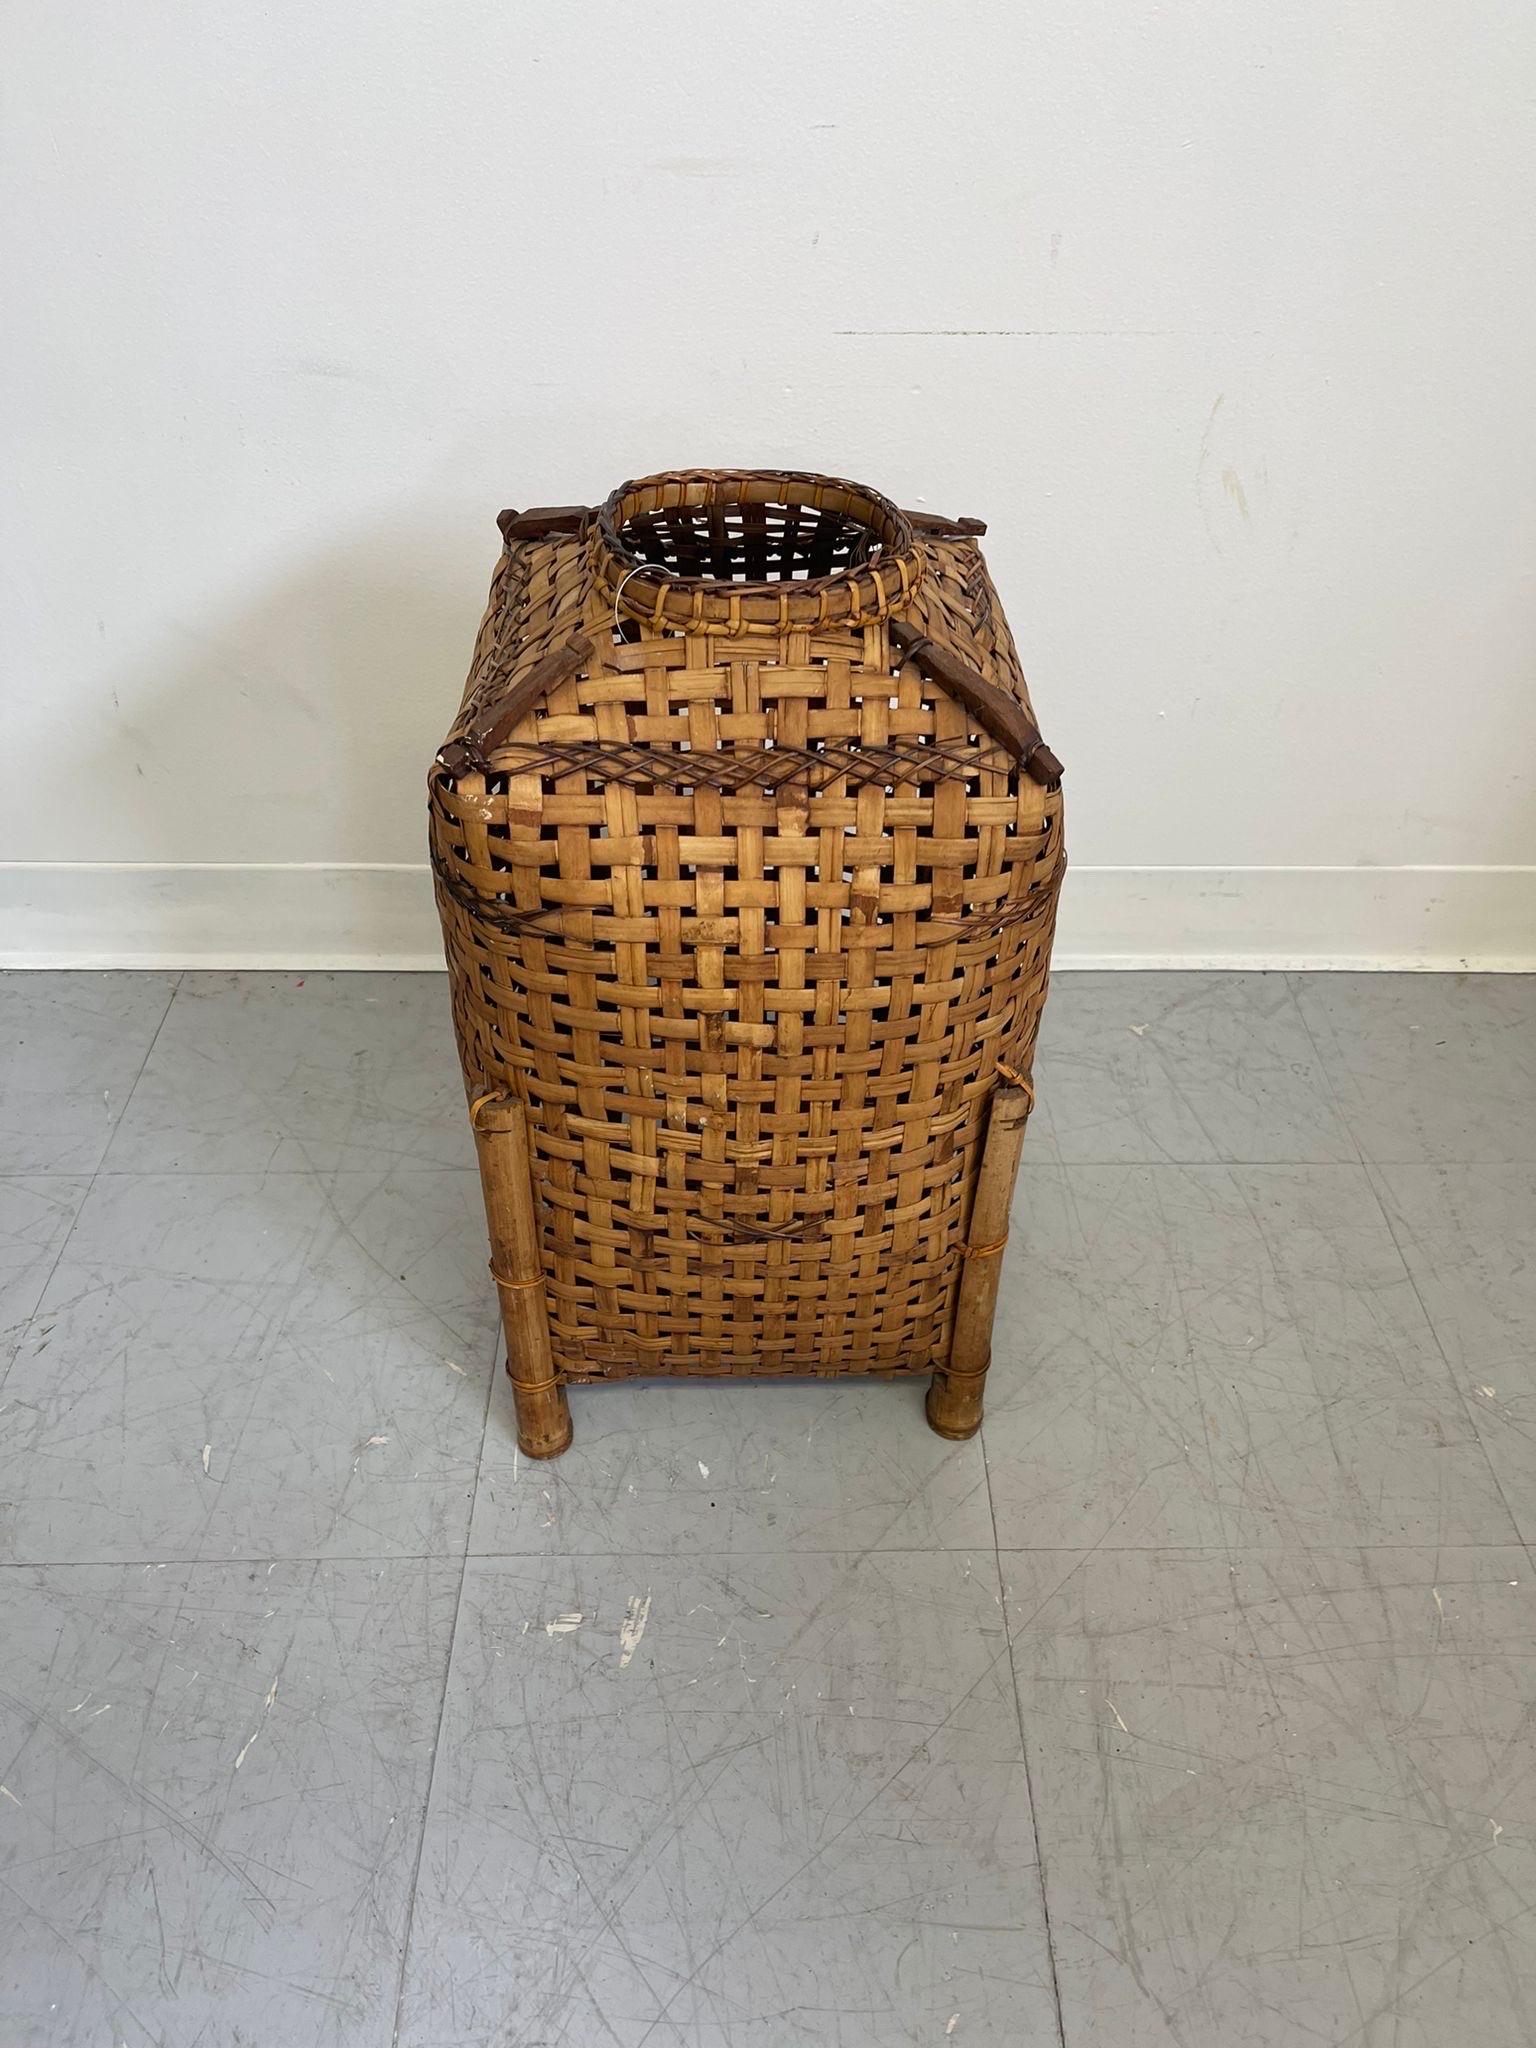 Rustic Basket with Intricate Detailing. Possibly Bamboo Legs. Wear and Tear Consistent with age as Pictured.

Dimensions. 12 W ; 12 D ; 21 H